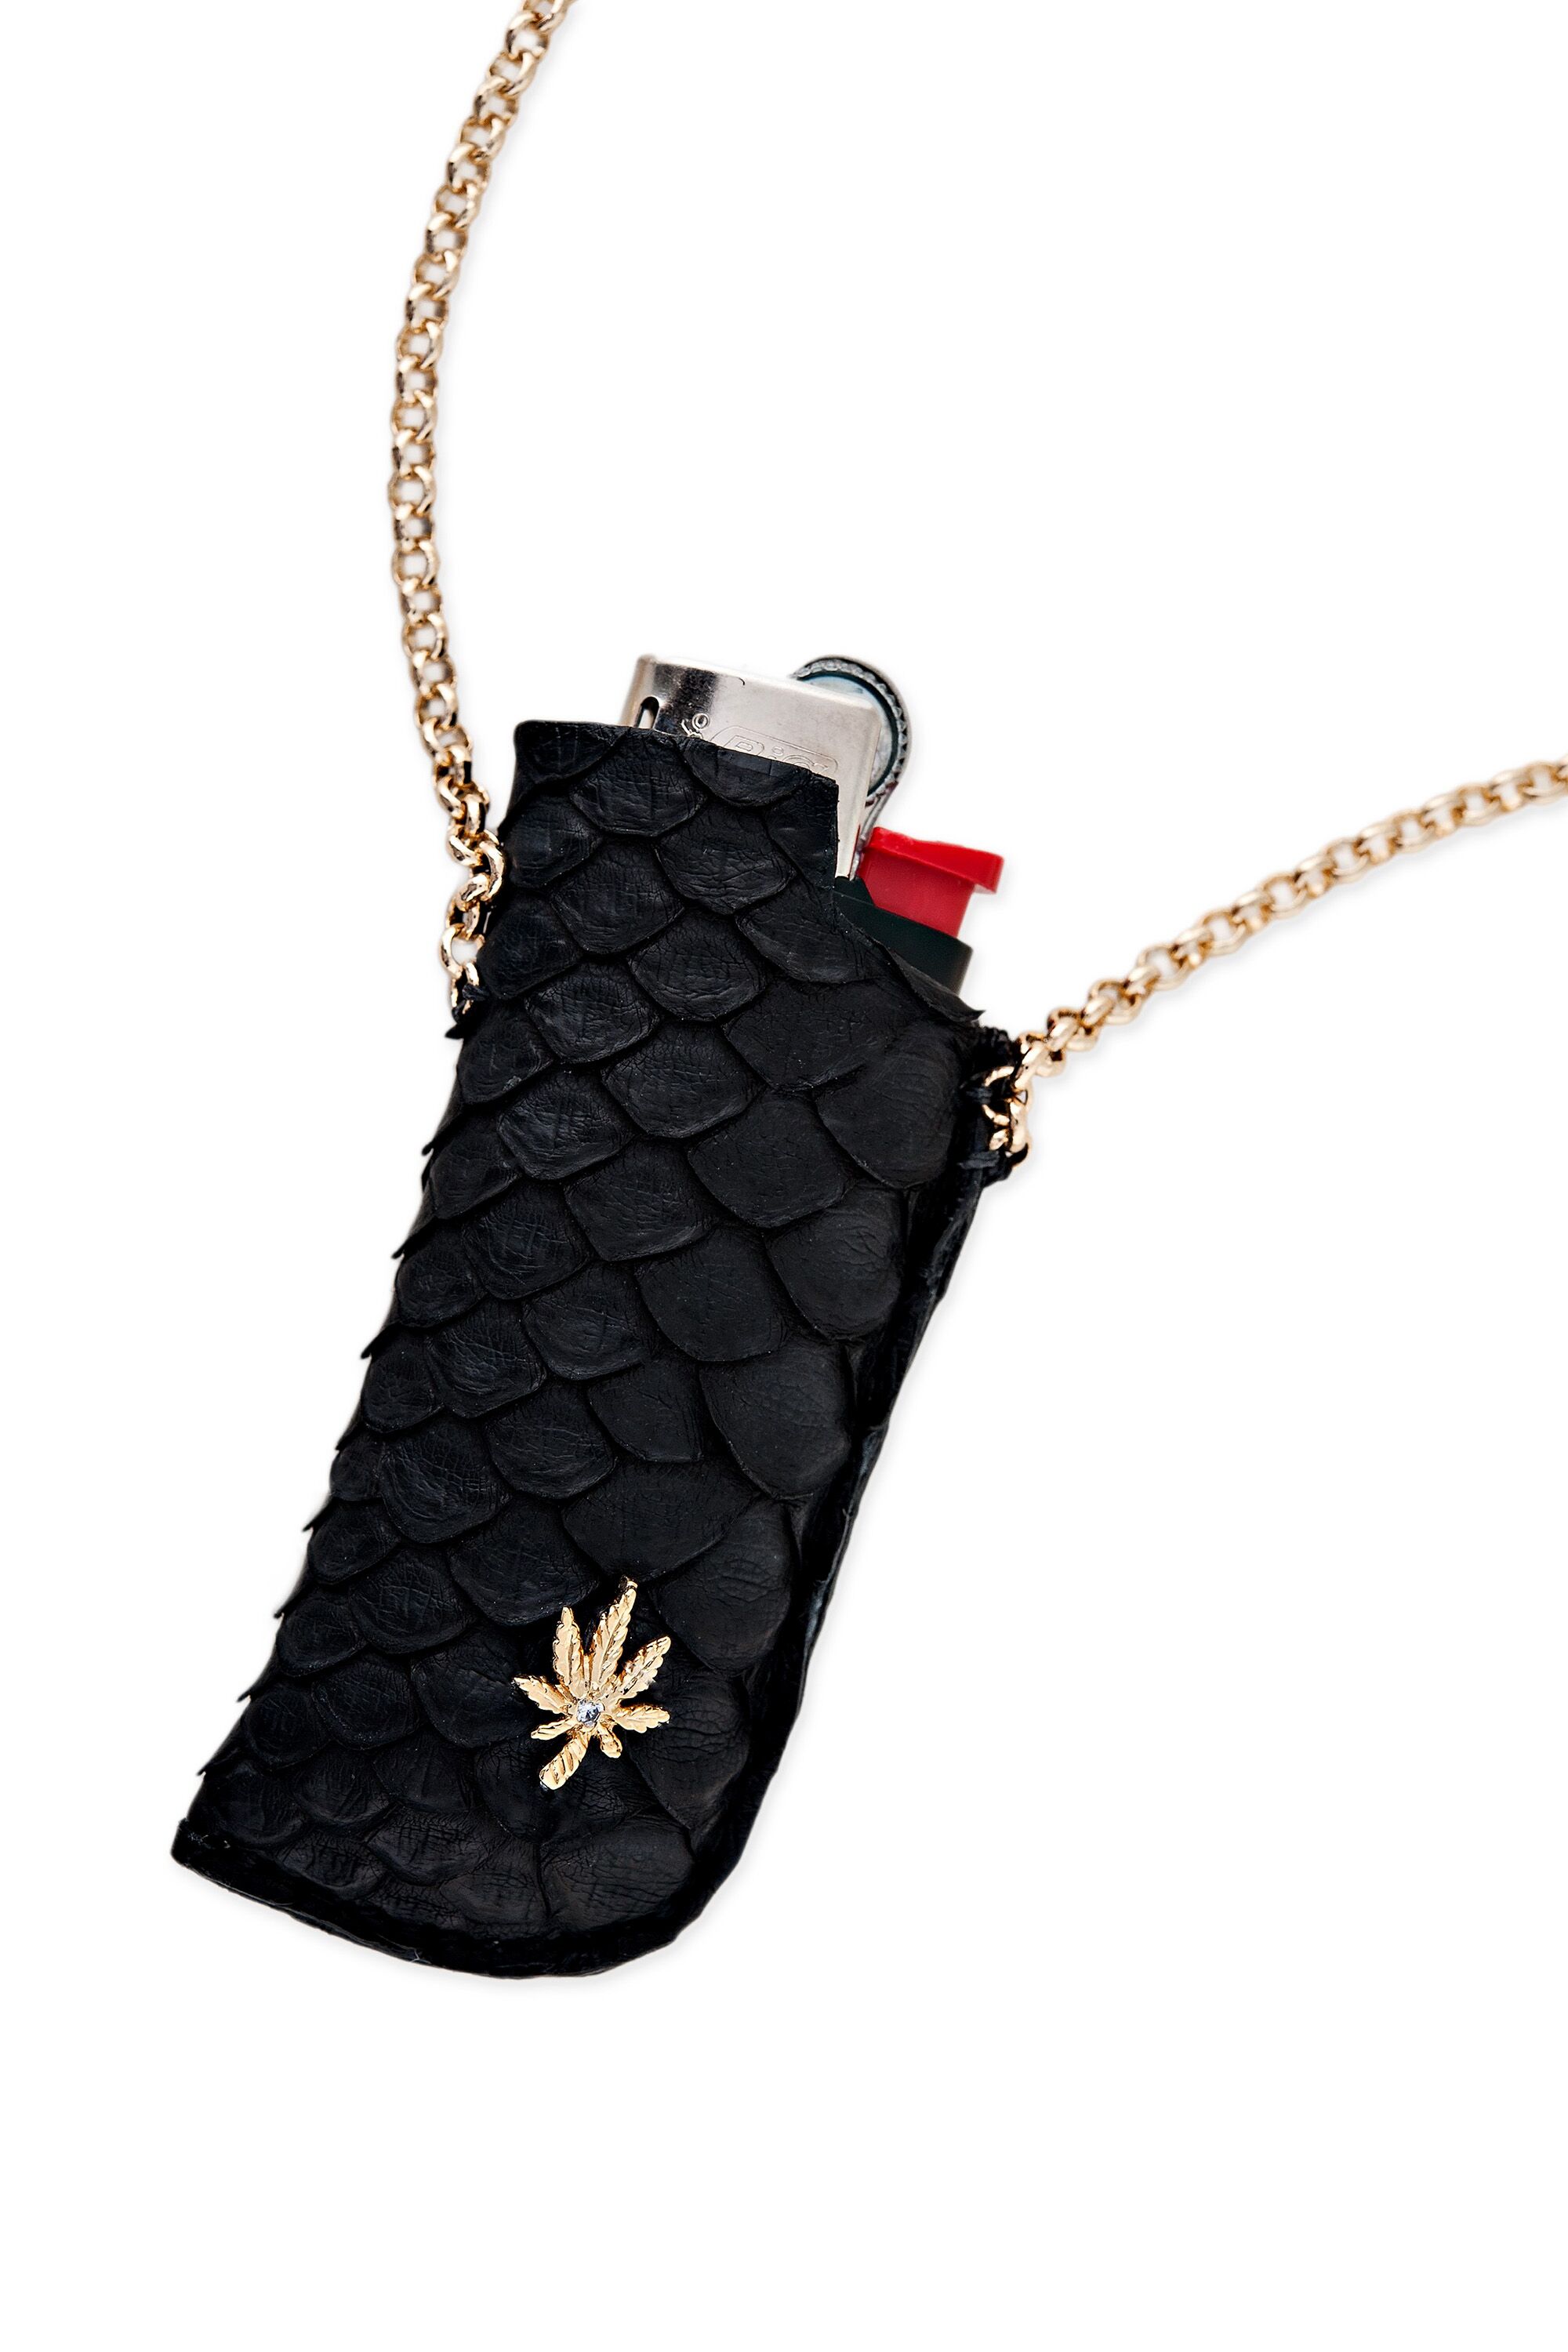 Snake skin lighter necklace from Jacquie Aiche.